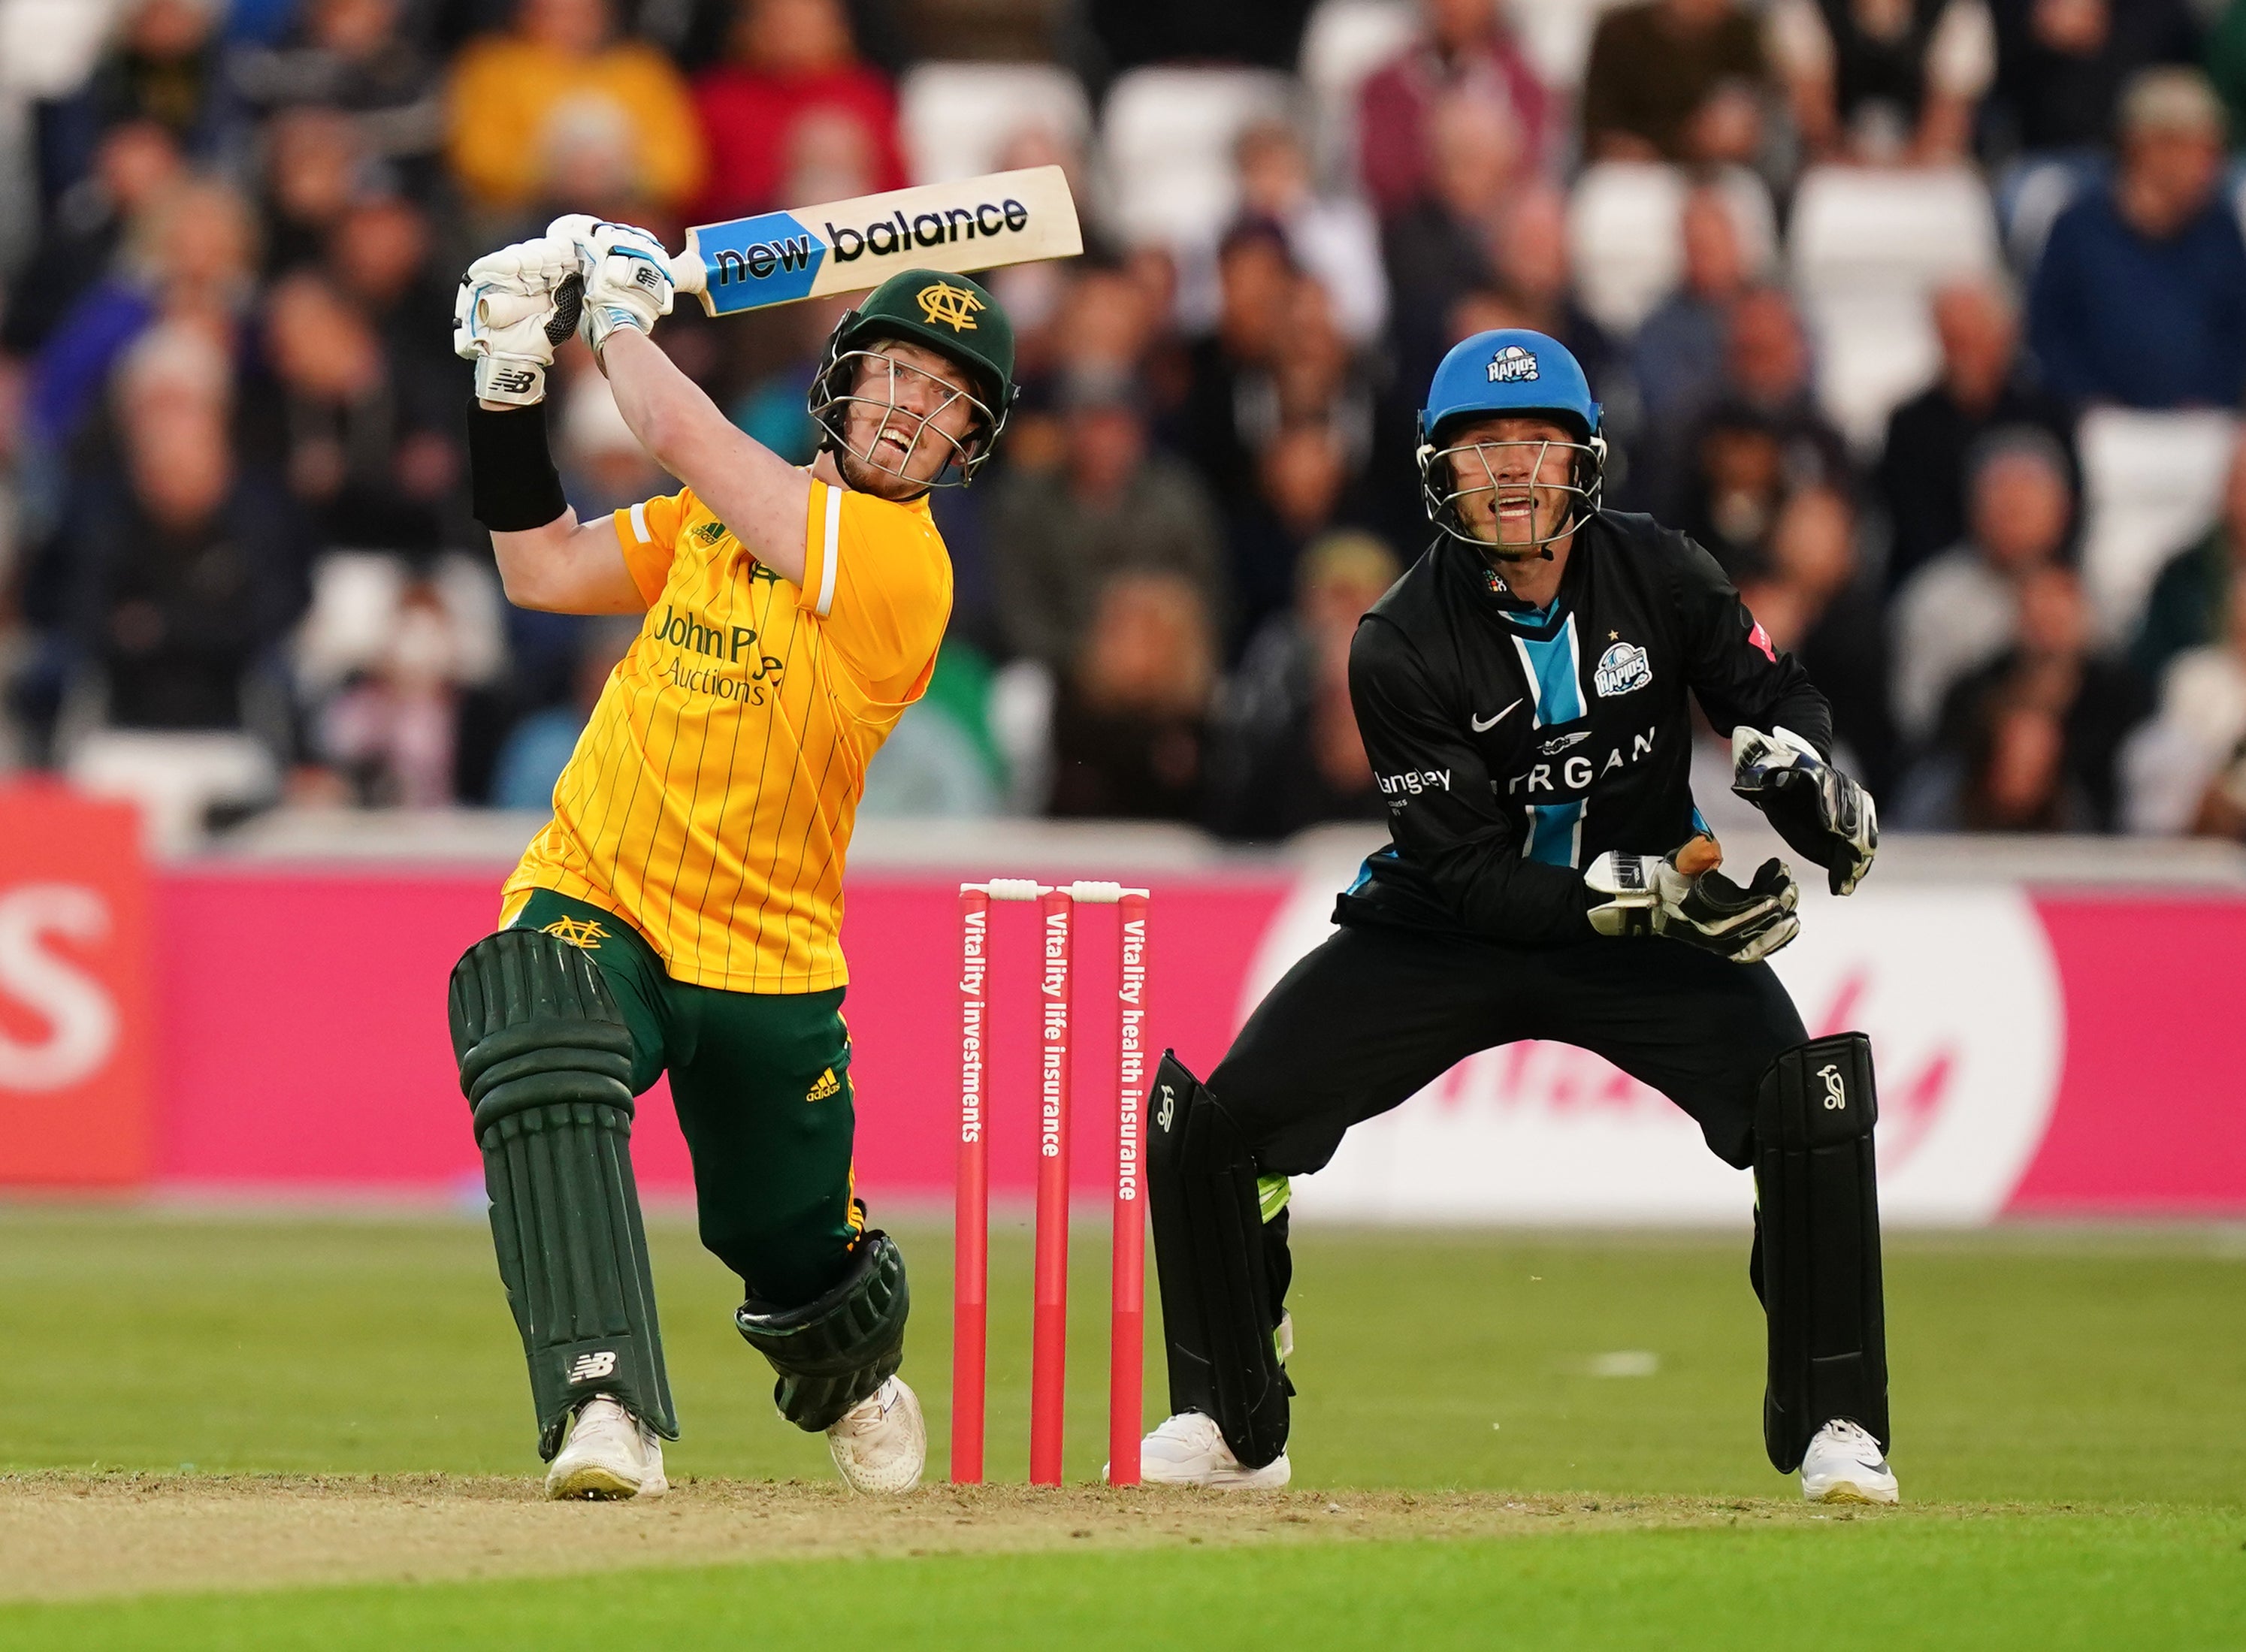 Notts Outlaws’ Tom Moores in action during the Vitality Blast T20 north group match against Worcestershire Rapids at Trent Bridge (Mike Egerton/PA)